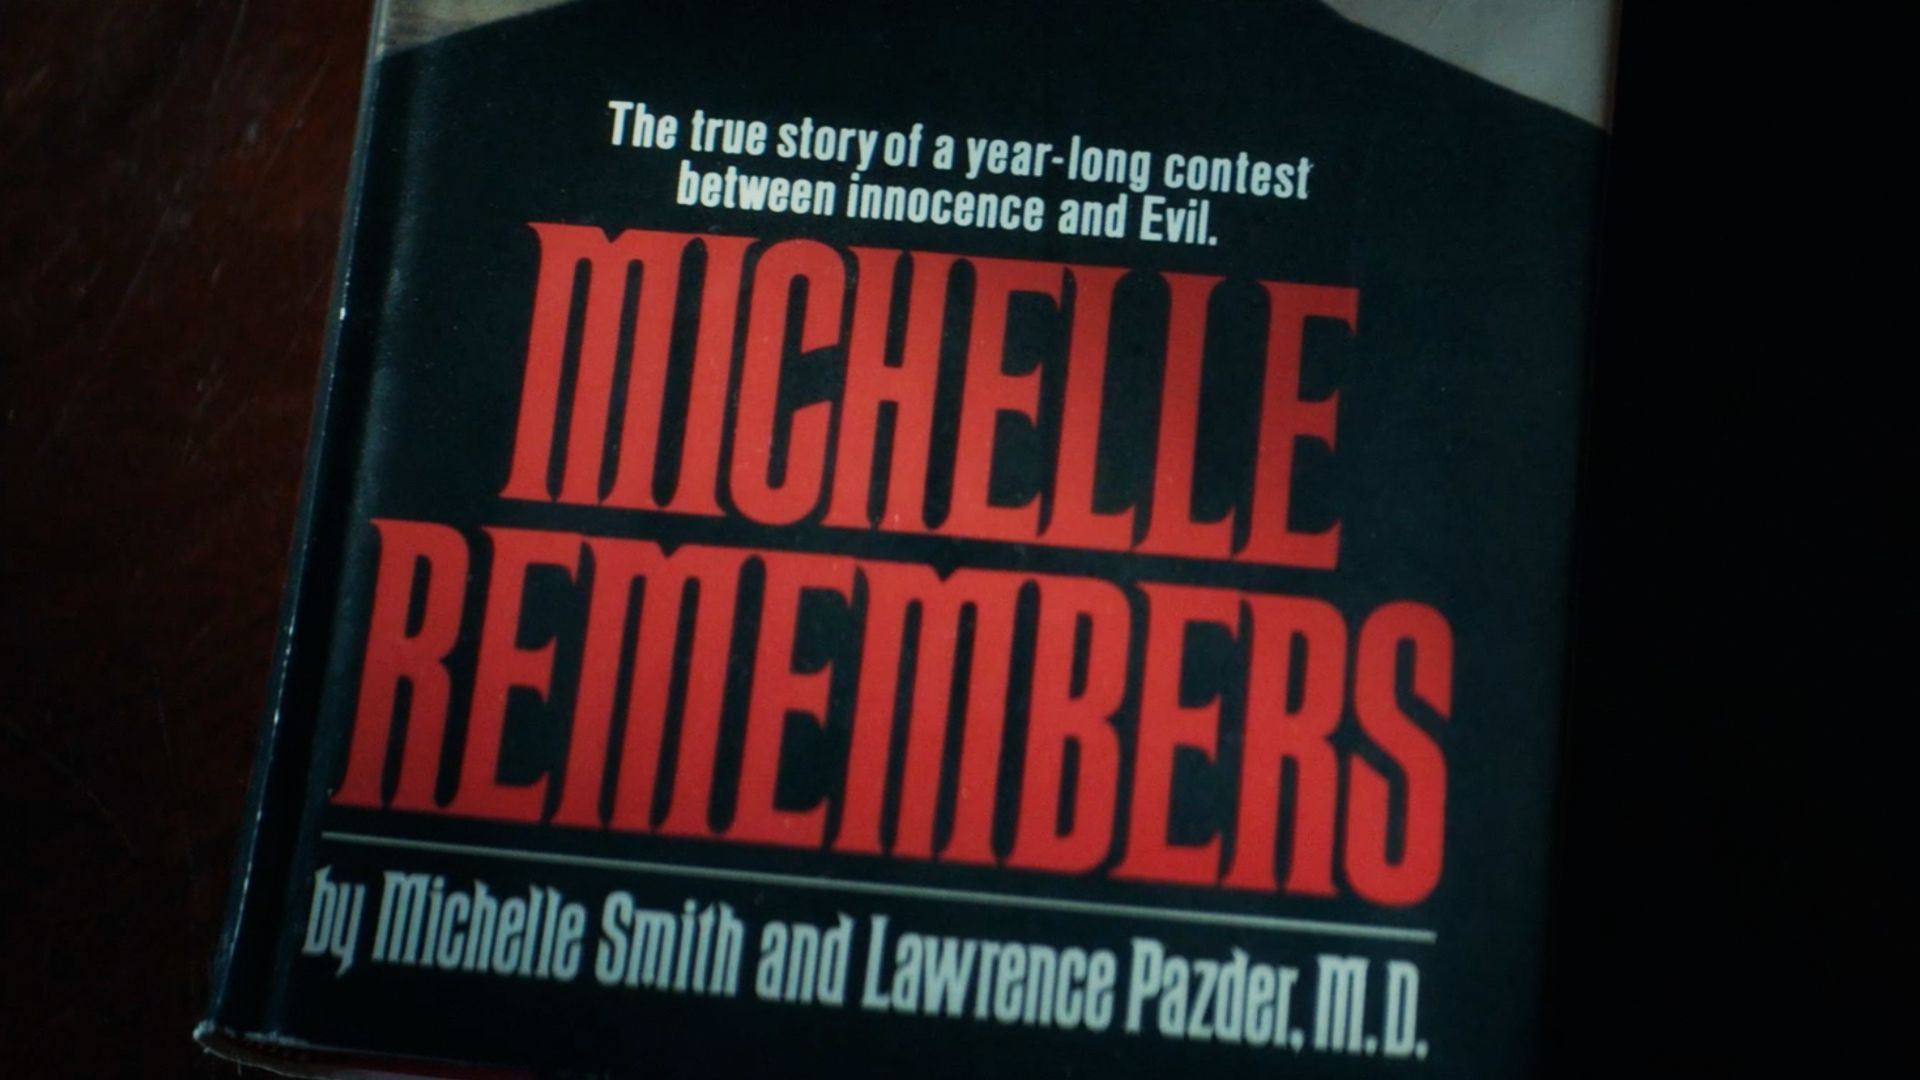 A copy of Michelle Remembers by Michelle Smith and Lawrence Pazder 